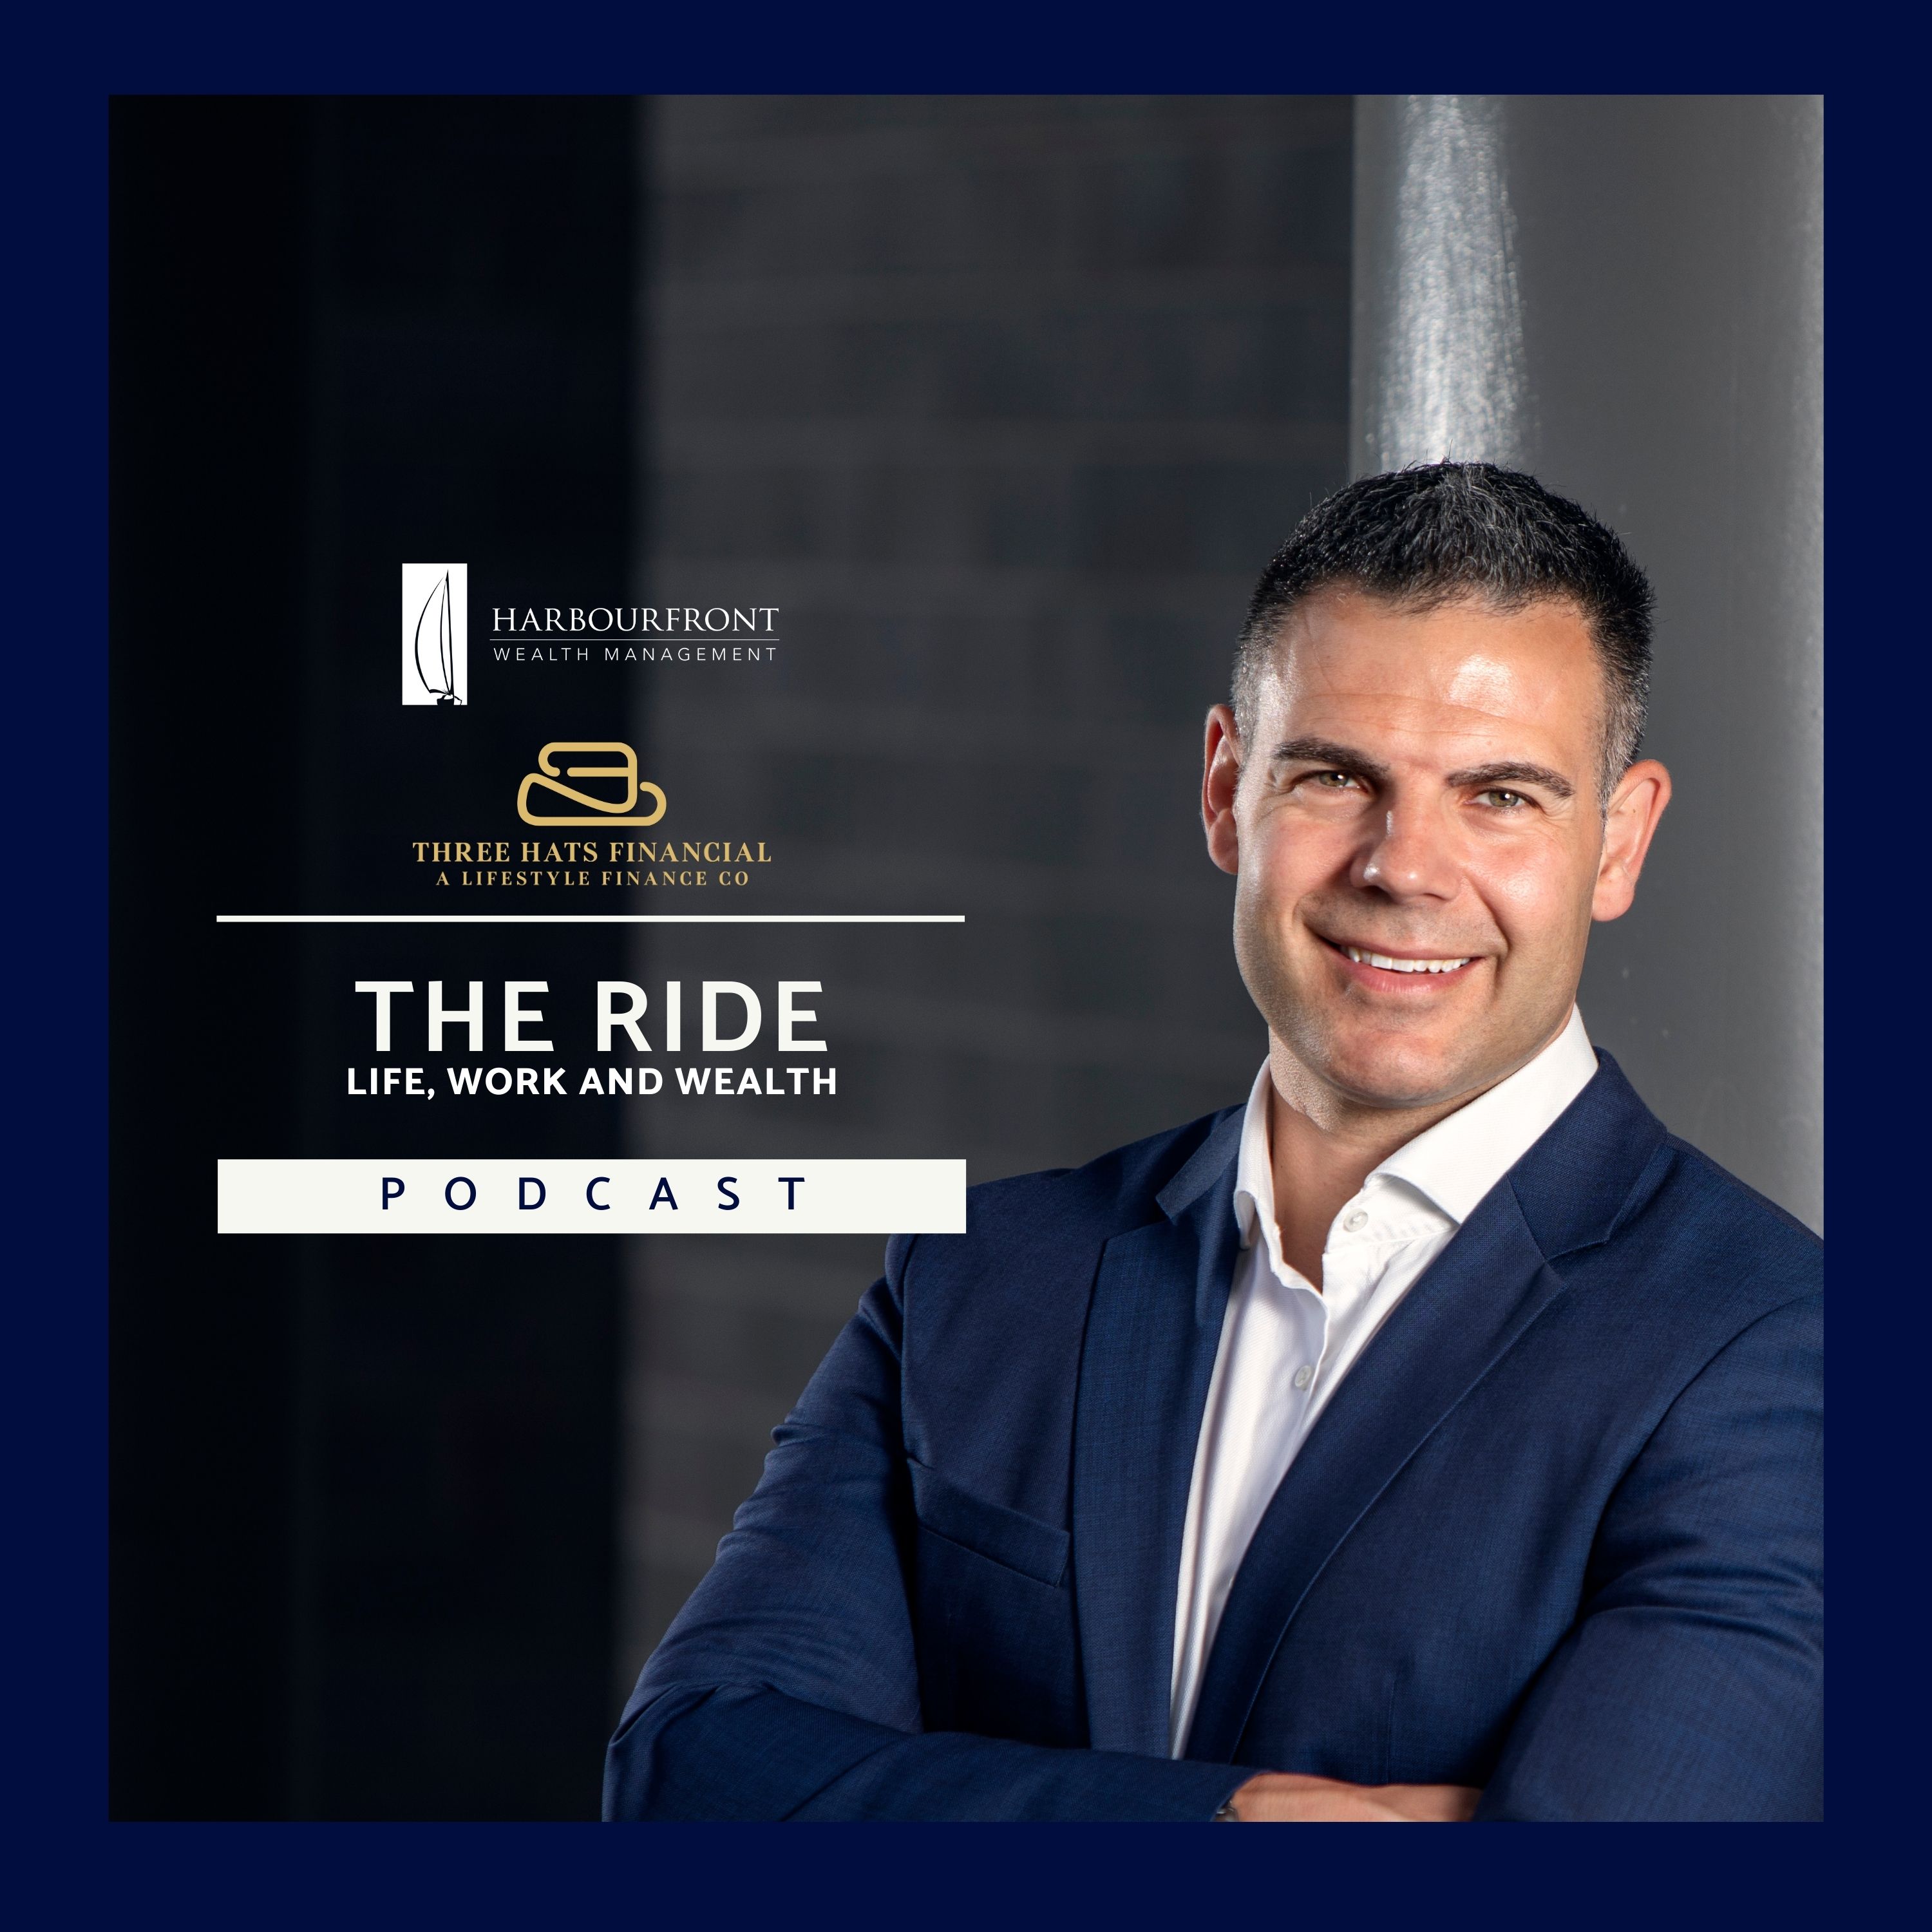 The Ride: Life, Work and Wealth